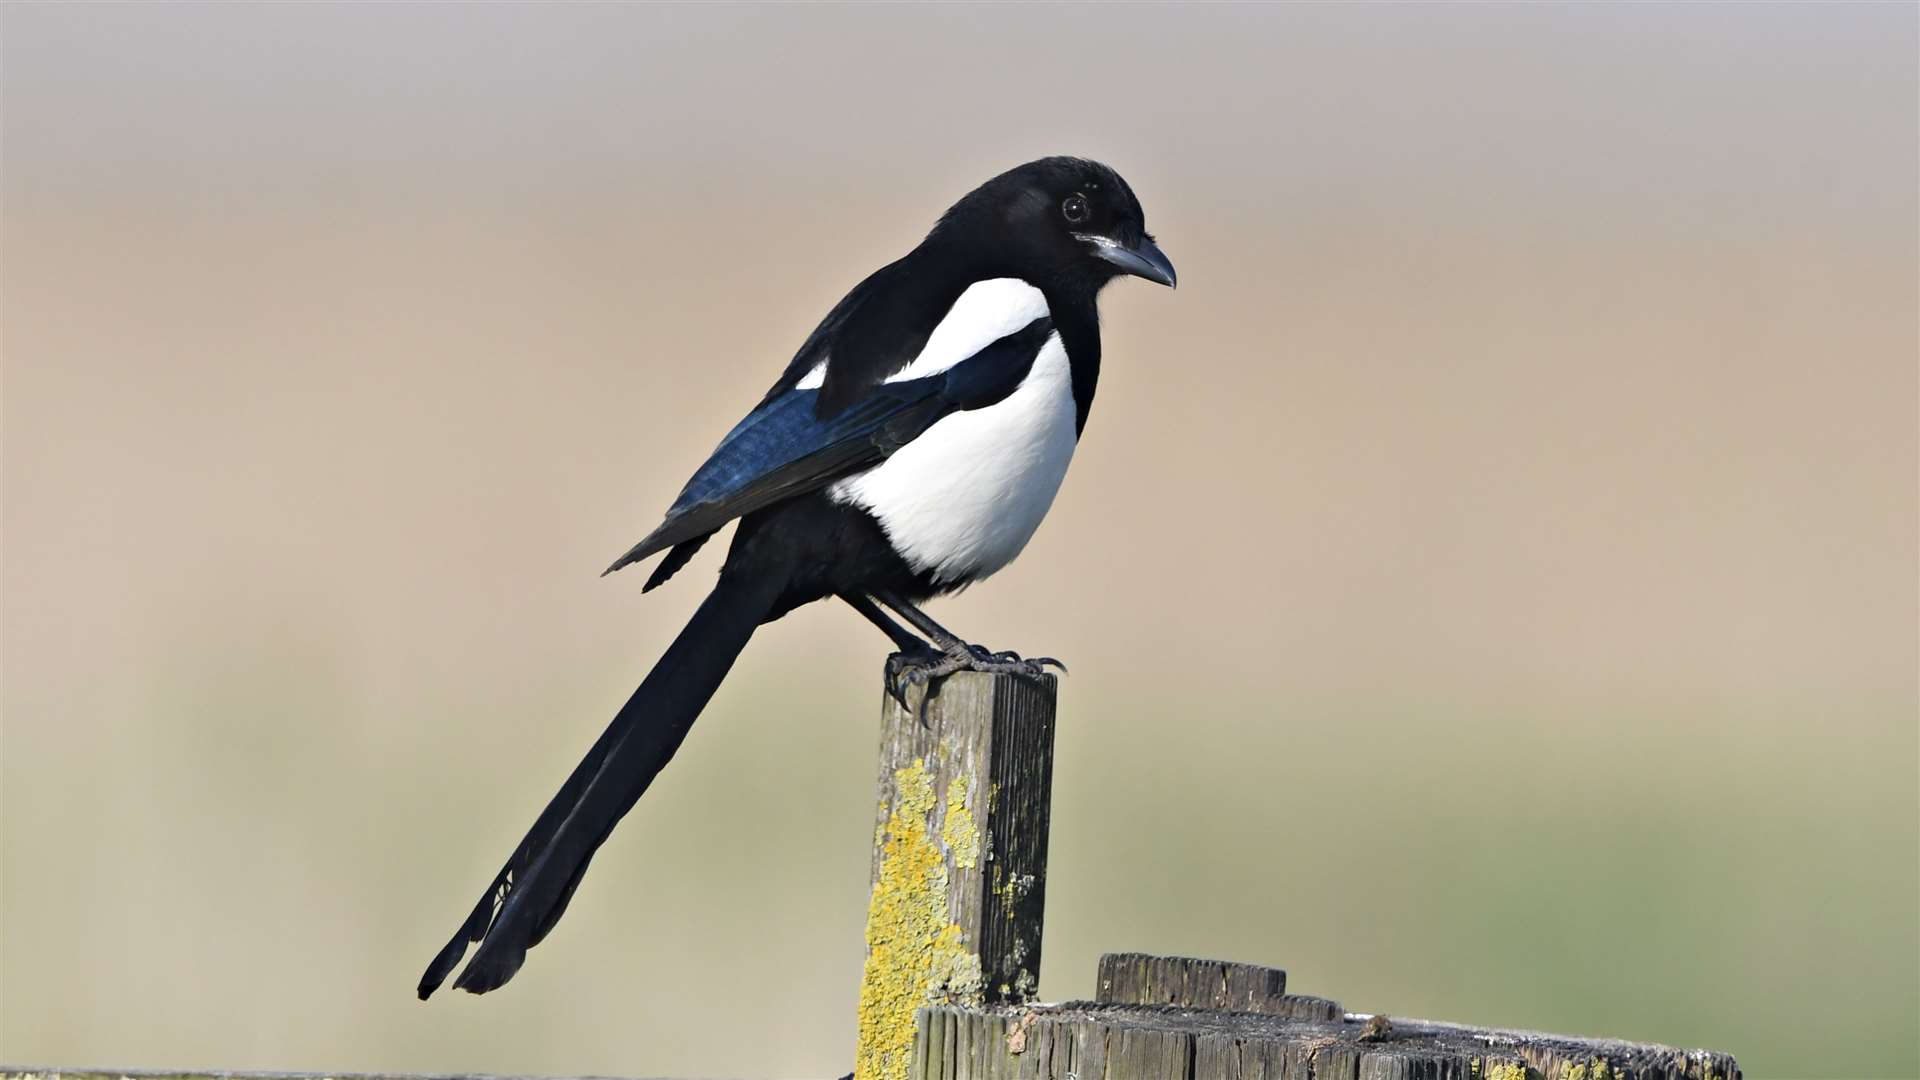 You might well spot a magpie Picture: RSPB/Richard Brooks